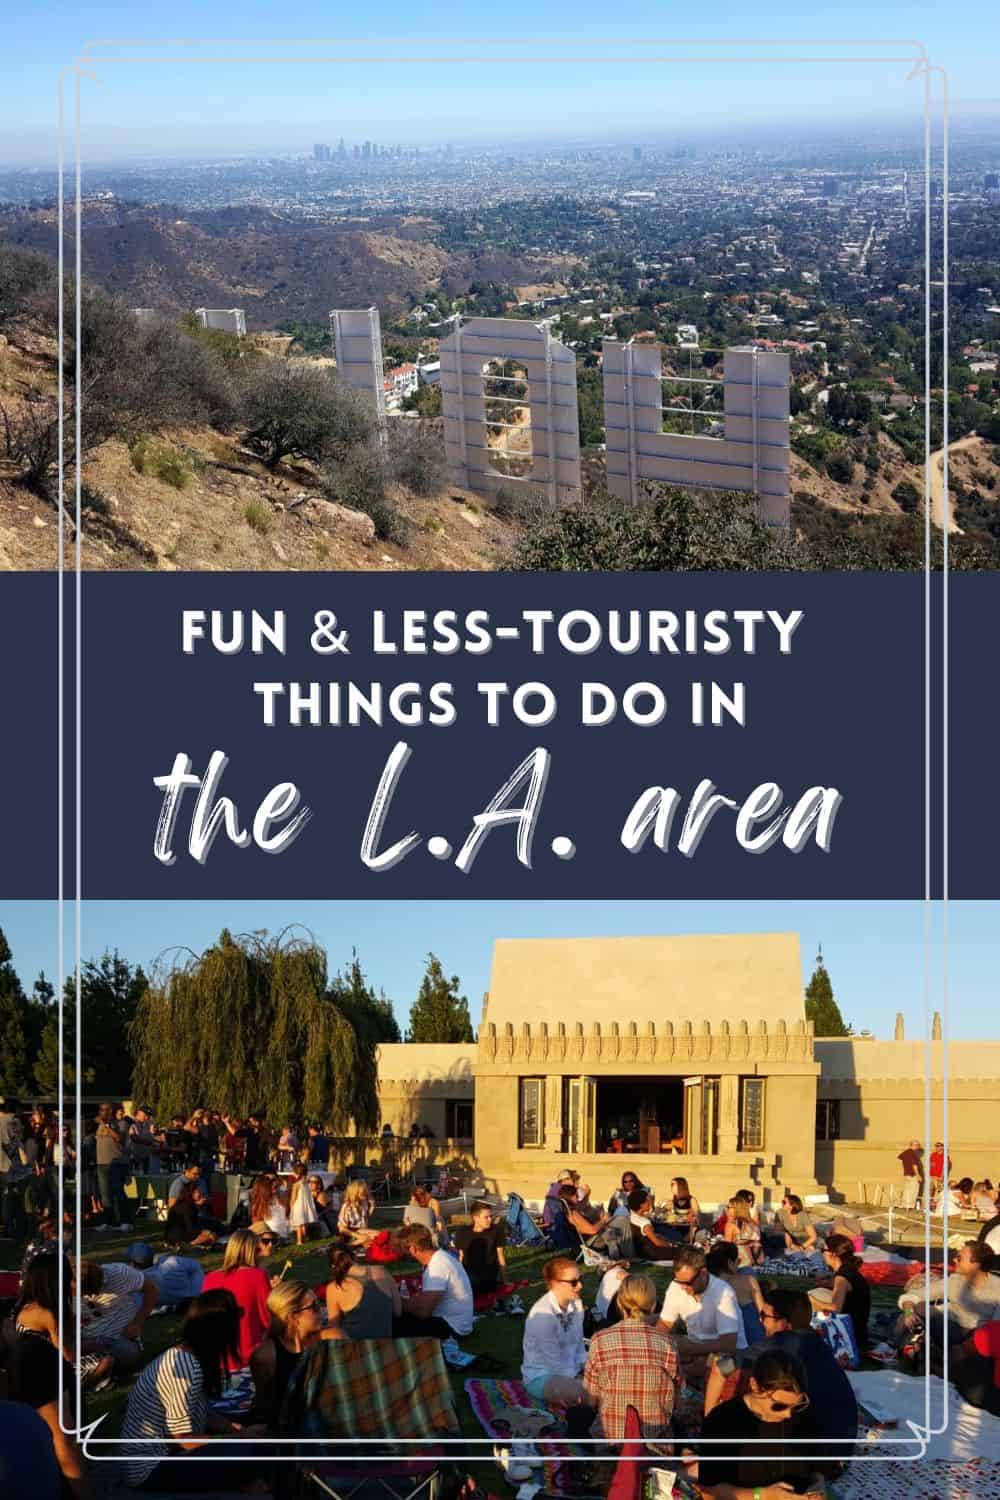 Less-Touristy, Fun Things to do in Los Angeles, California | You can avoid the tourist traps in L.A. & instead find some of the less-touristy, fun things to do in Los Angeles...great recommendations from locals on nature, hiking, arts, food, & more! What to do in L.A., things to do in Los Angeles, off the beaten path ideas. #losangeles #visitla #visitcalifornia 